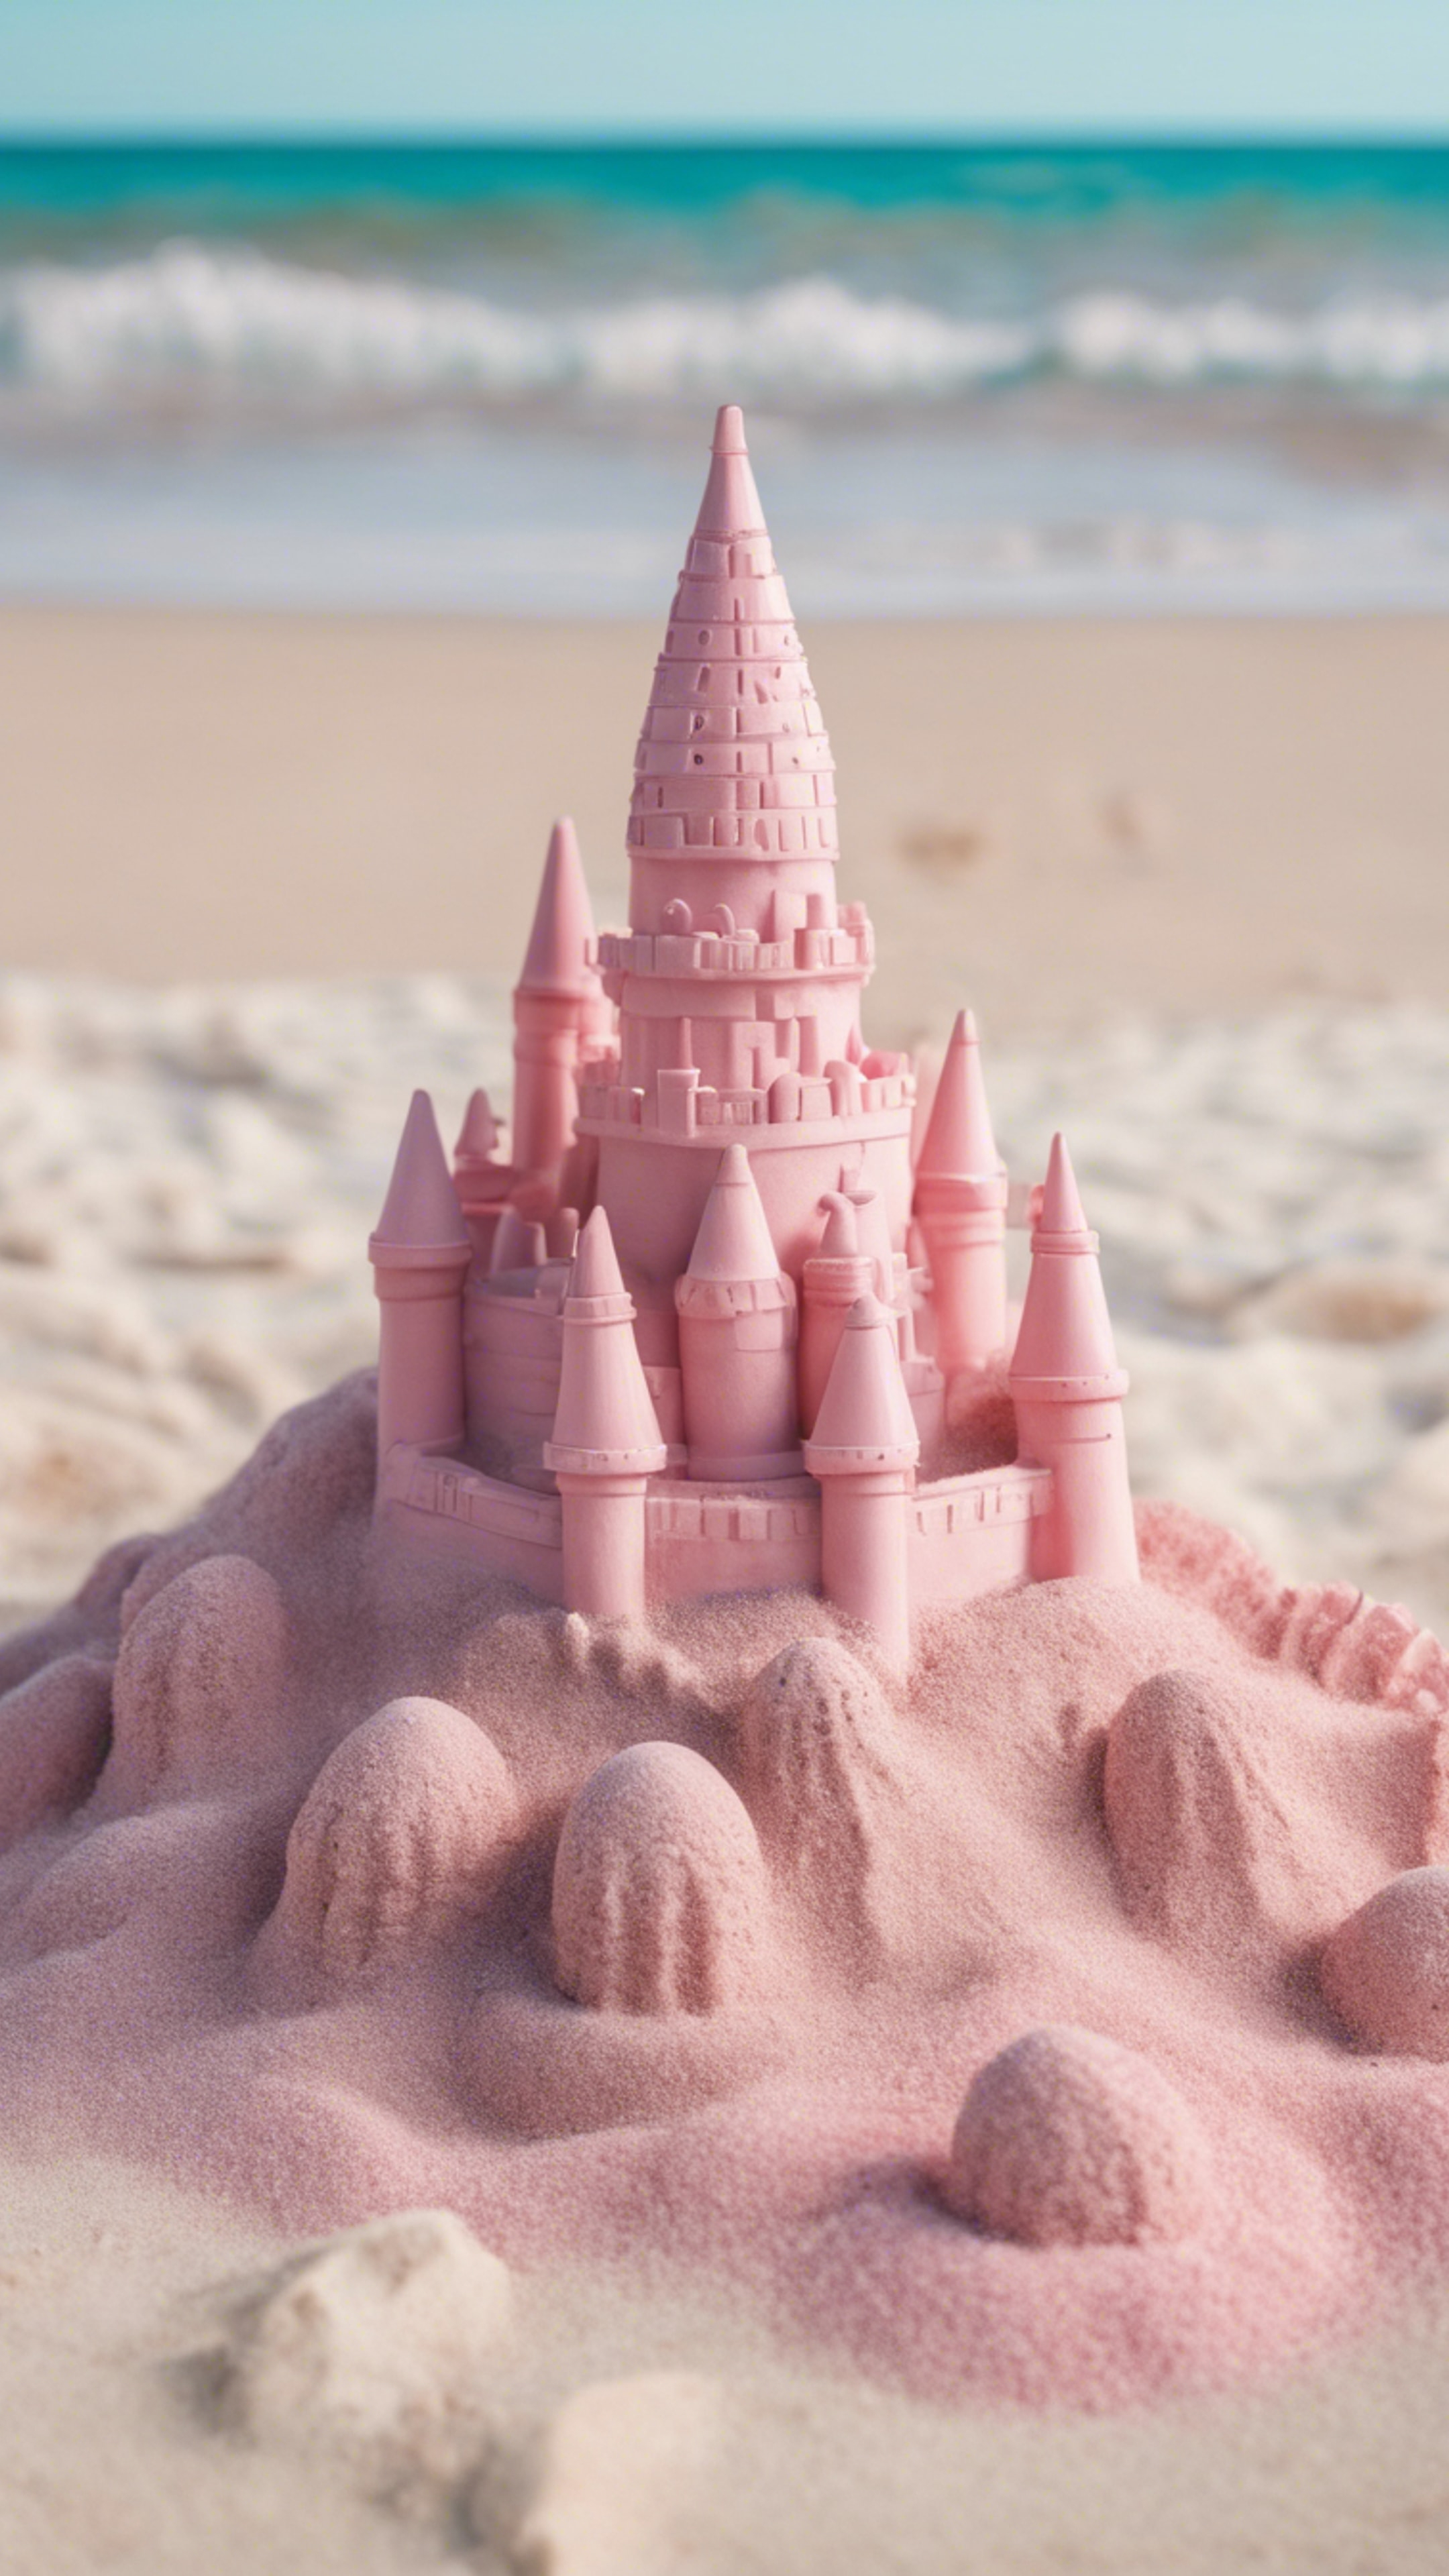 An intricate preppy pastel pink sandcastle on an idyllic beach with clear azure waters. Tapeta[55e256d408524d5fa872]